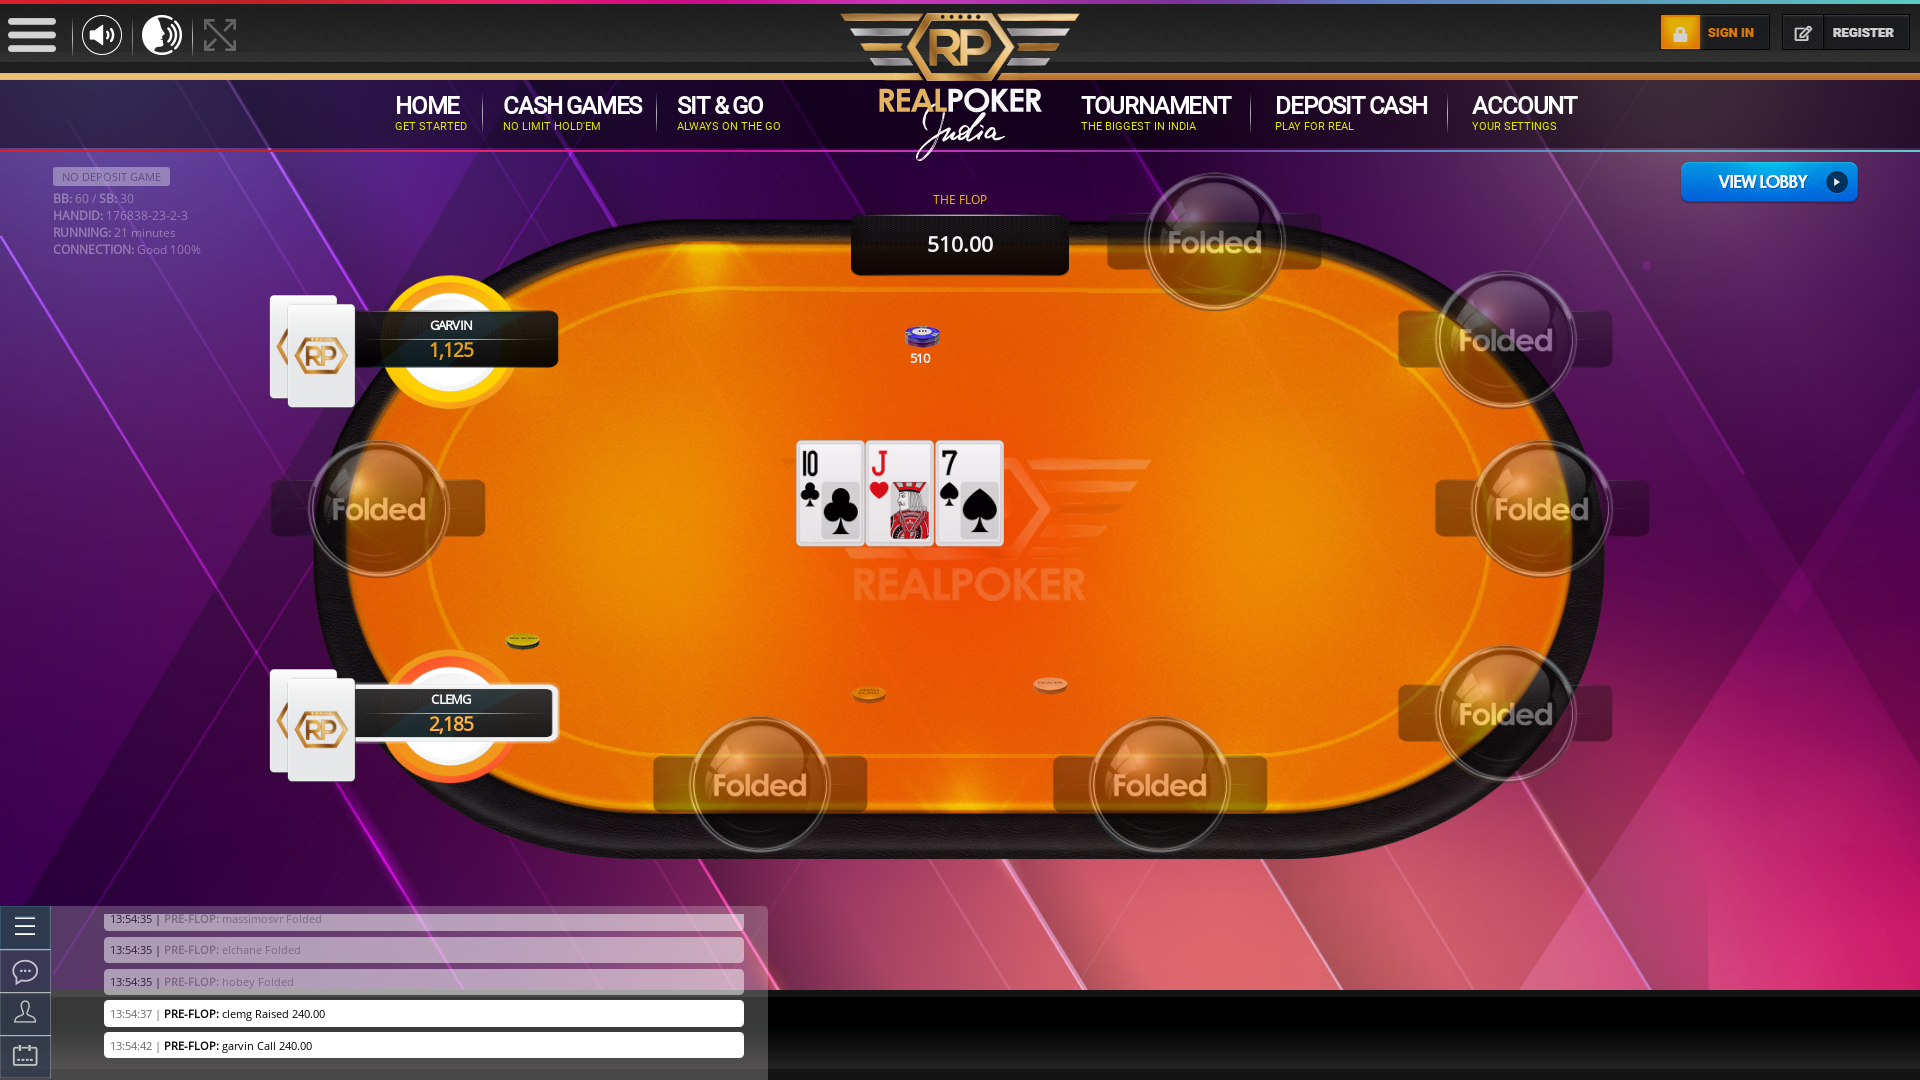 10 player texas holdem table at real poker with the table id 176838